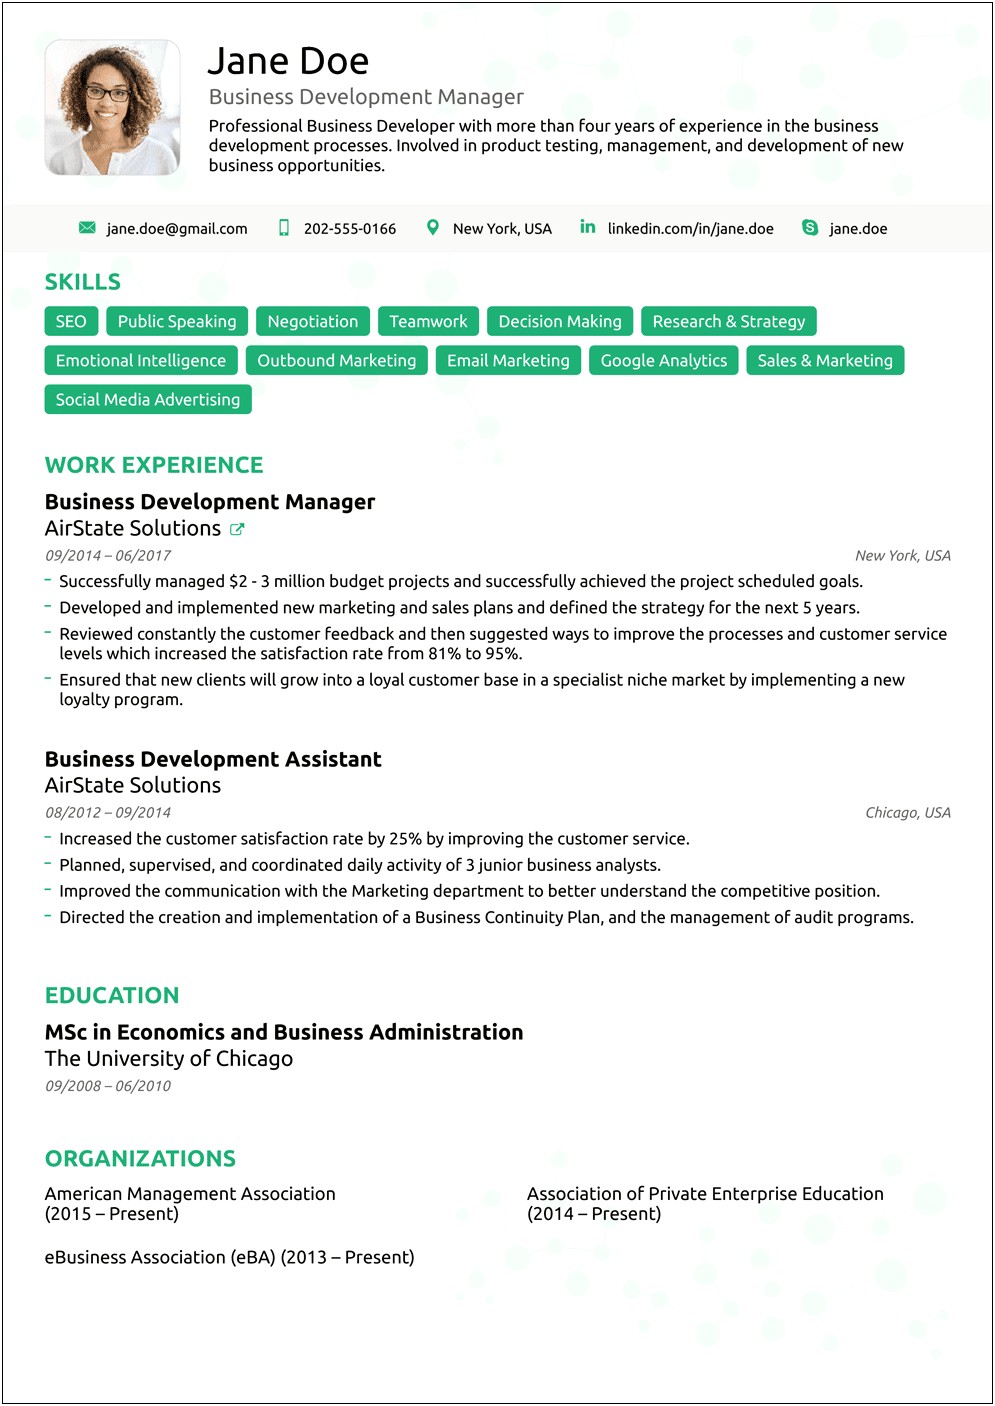 Examples Of Current Resume Styles